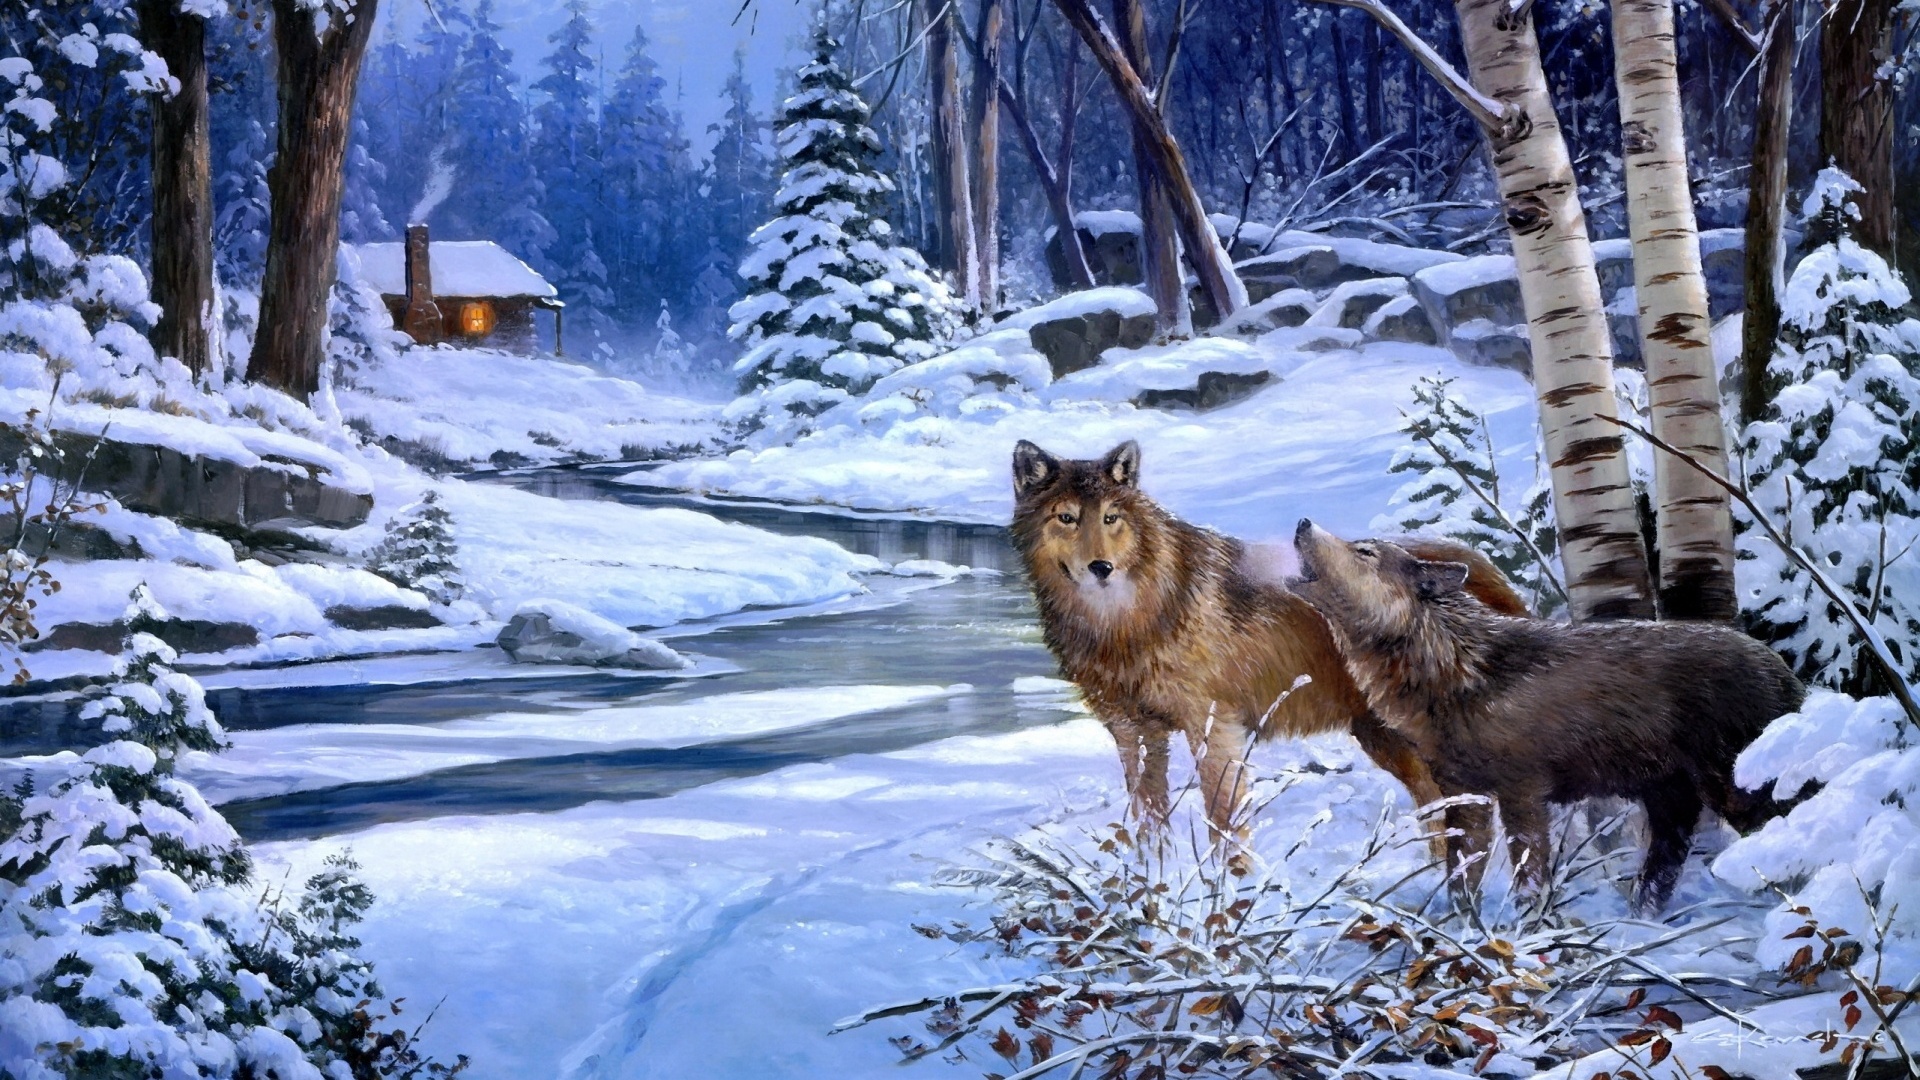 wolves, cabin, winter, forest, river, snow